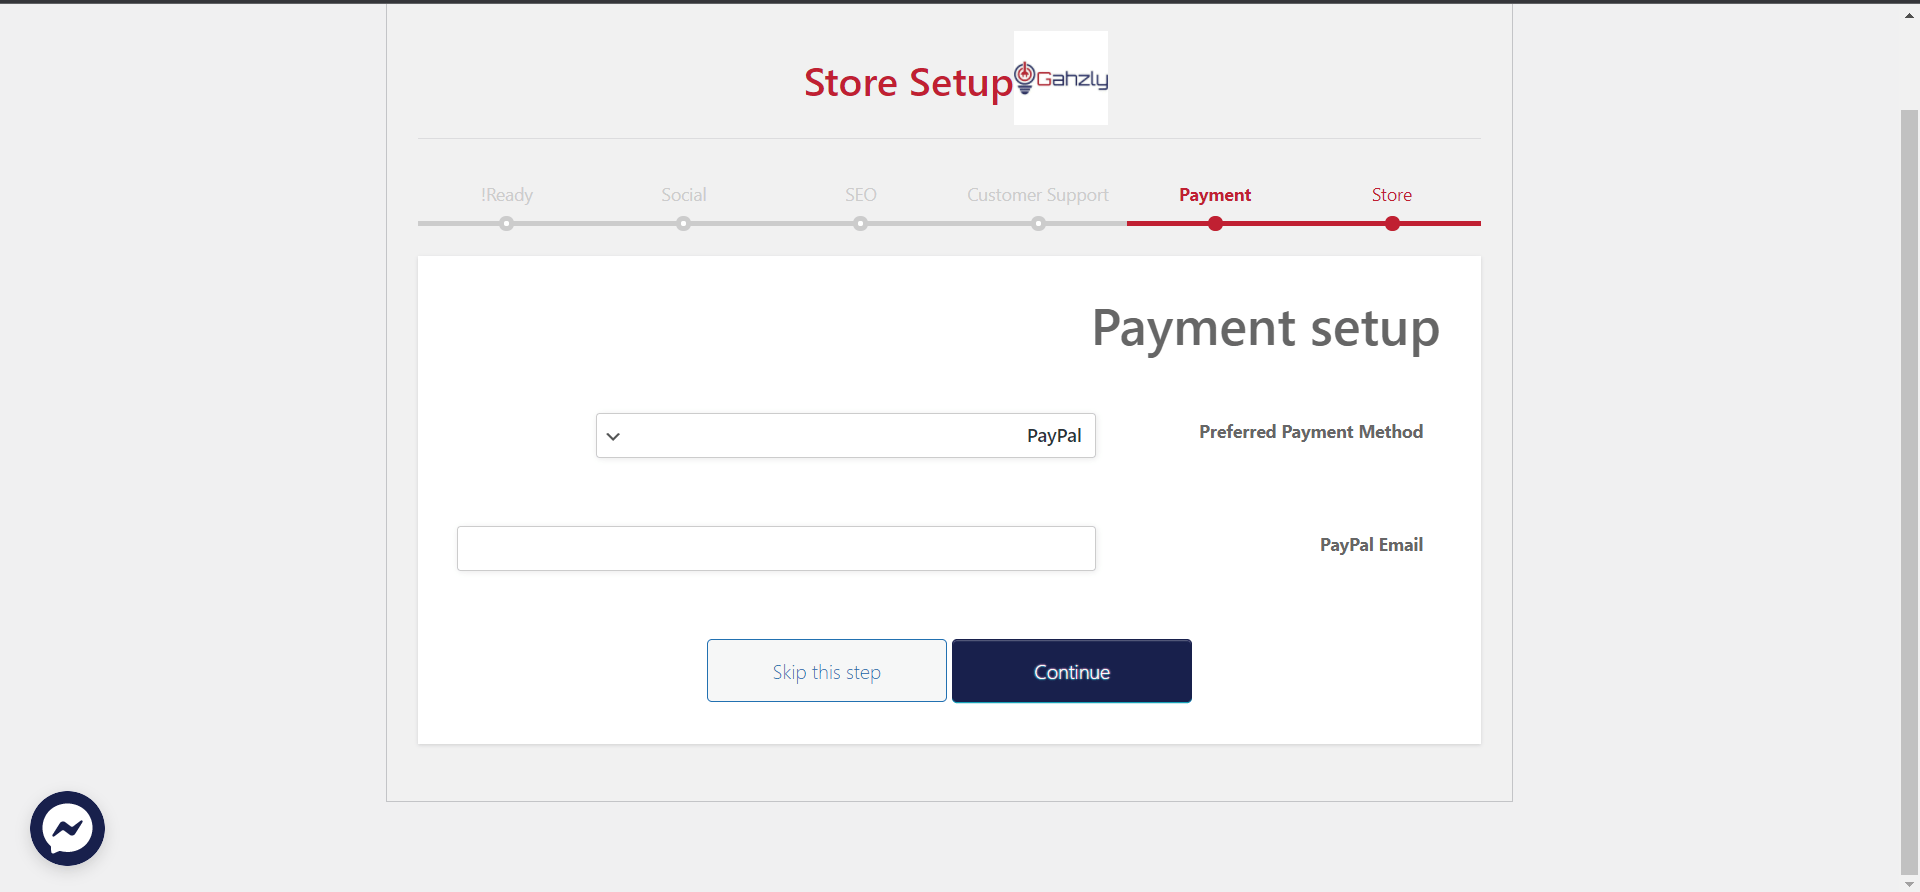 Gahzly's guide to creating your store on the platform